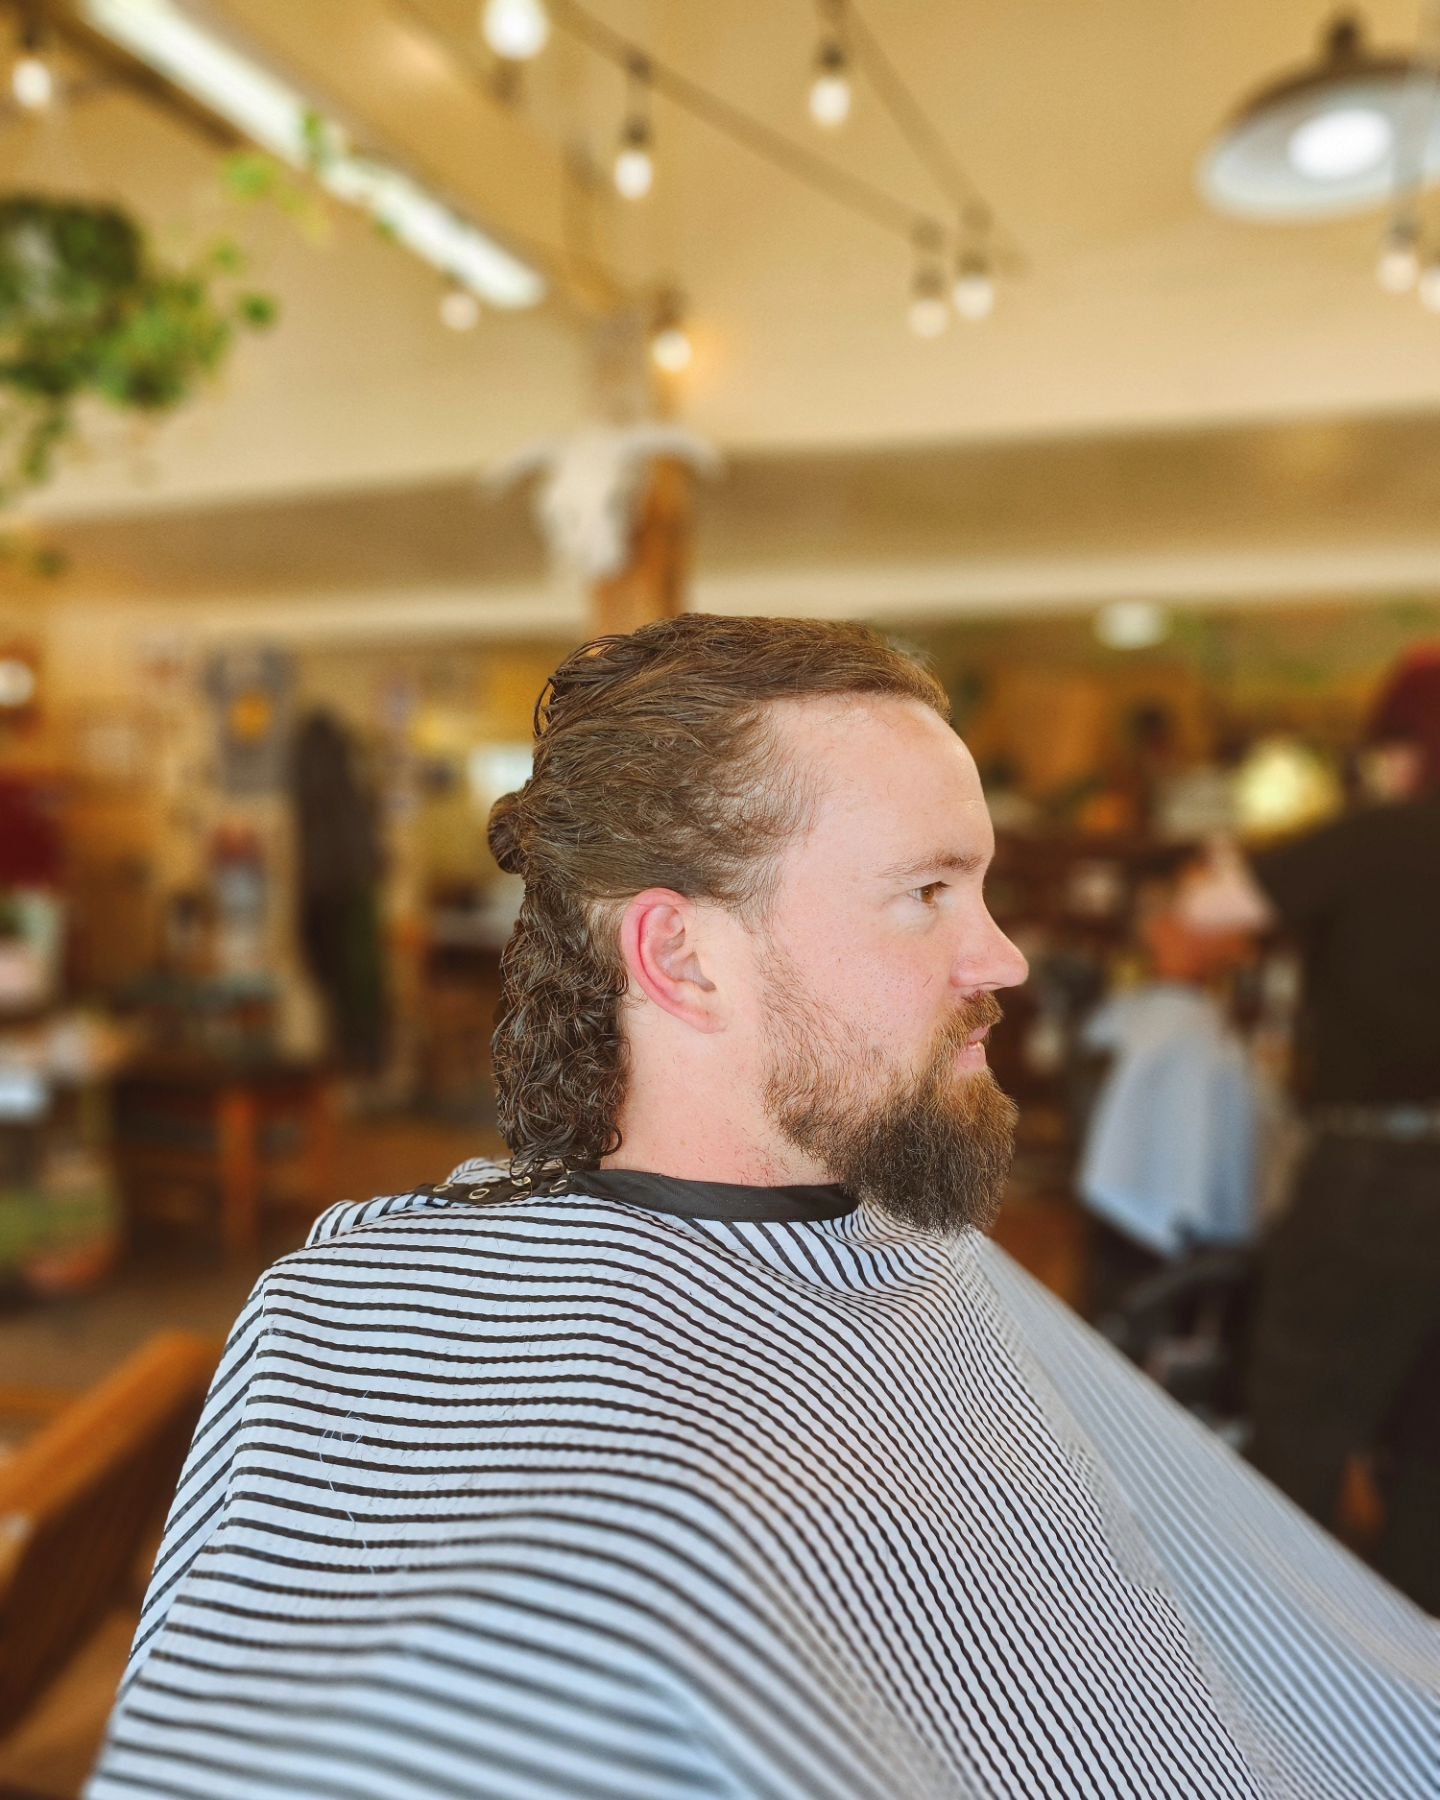 Need a refresh for the summer? Long locks aren't just for the gals, dudes and folks all around.. That's why at Bucks Parlor, we price haircuts based on the length of your hair, not your gender! We're a place for all y'all. 
We do haircuts &amp; beard